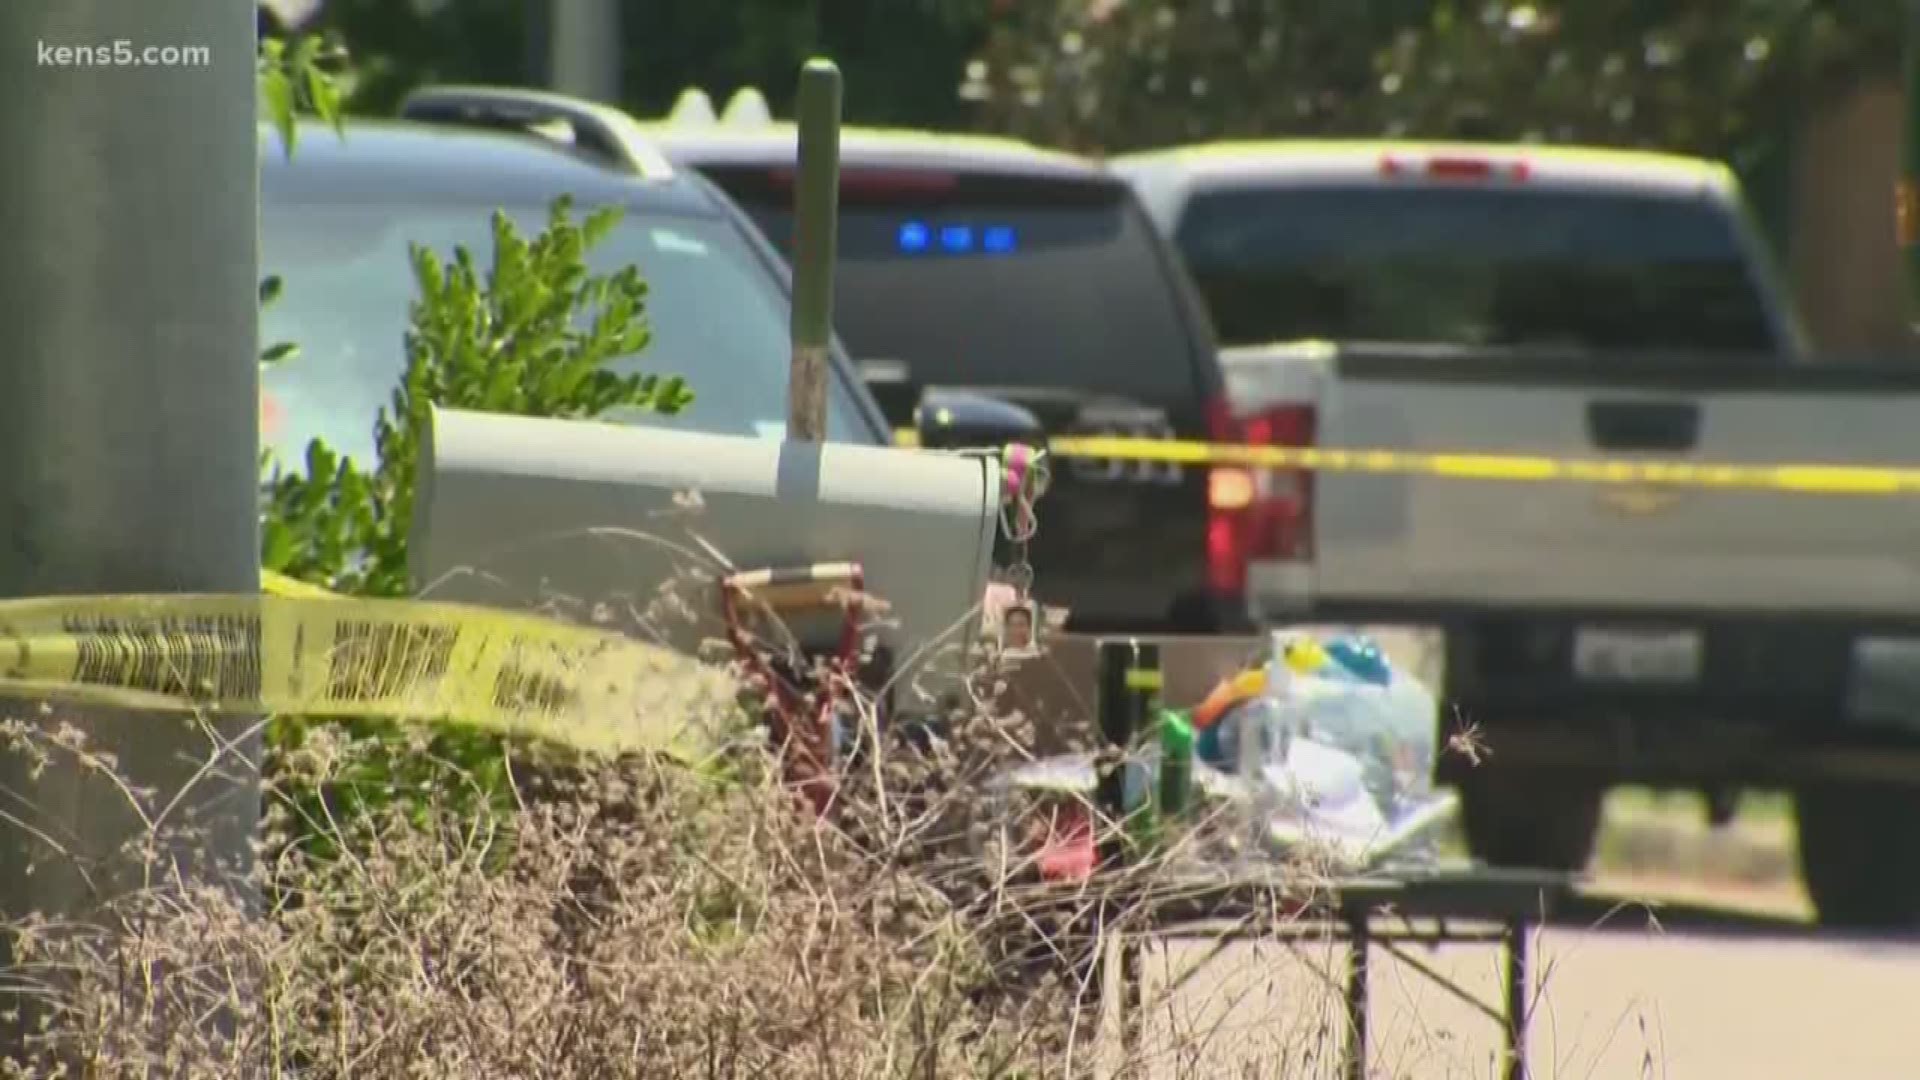 Police are still investigating after human skeletal remains were found in Seguin. They believe the body decayed for three years while two people were living in the house.